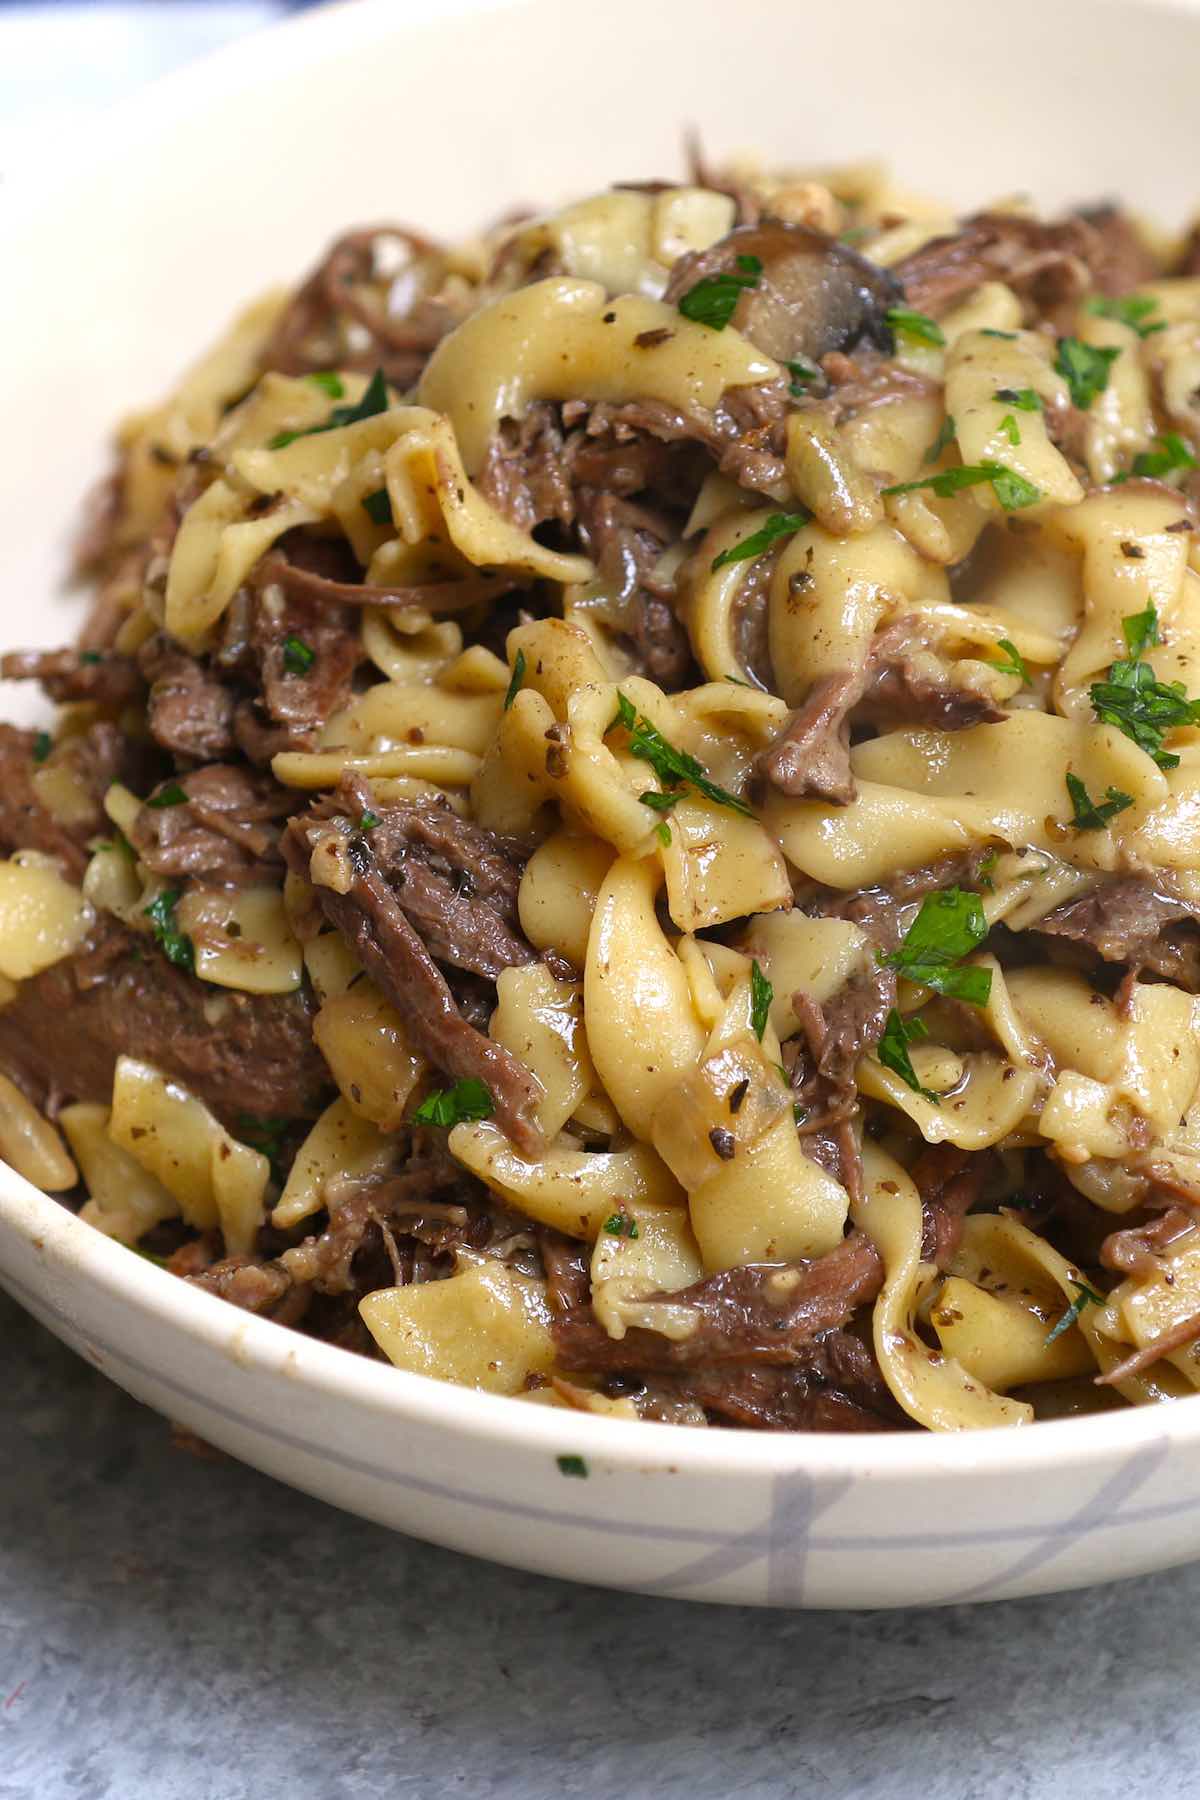 Tender and comforting Beef Tips and Noodles are the perfect dish to serve for a Sunday dinner with the family. The beef is simmered low and slow in a creamy sauce and it’s served on a bed of egg noodles. All you need is a side of steamed broccoli or asparagus for a hearty and satisfying meal.